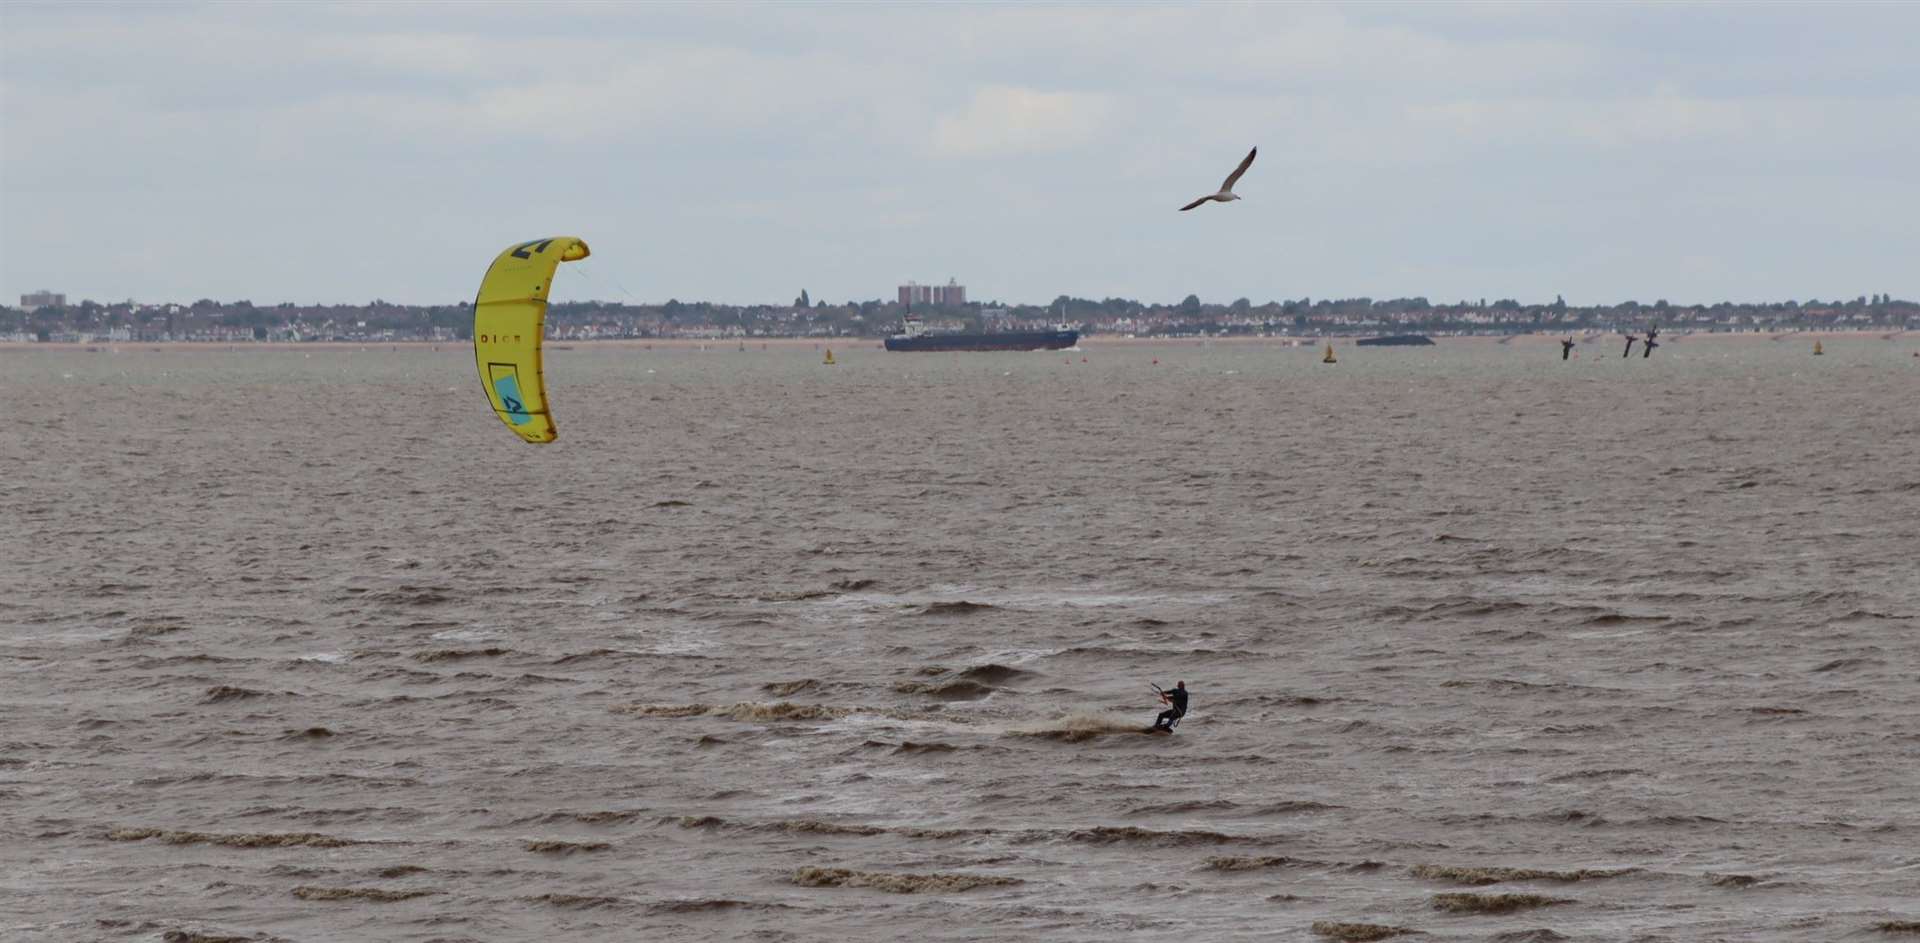 Kite surfers off the shingle bank at Minster on the Isle of Sheppey after coronavirus lockdown restrictions were eased